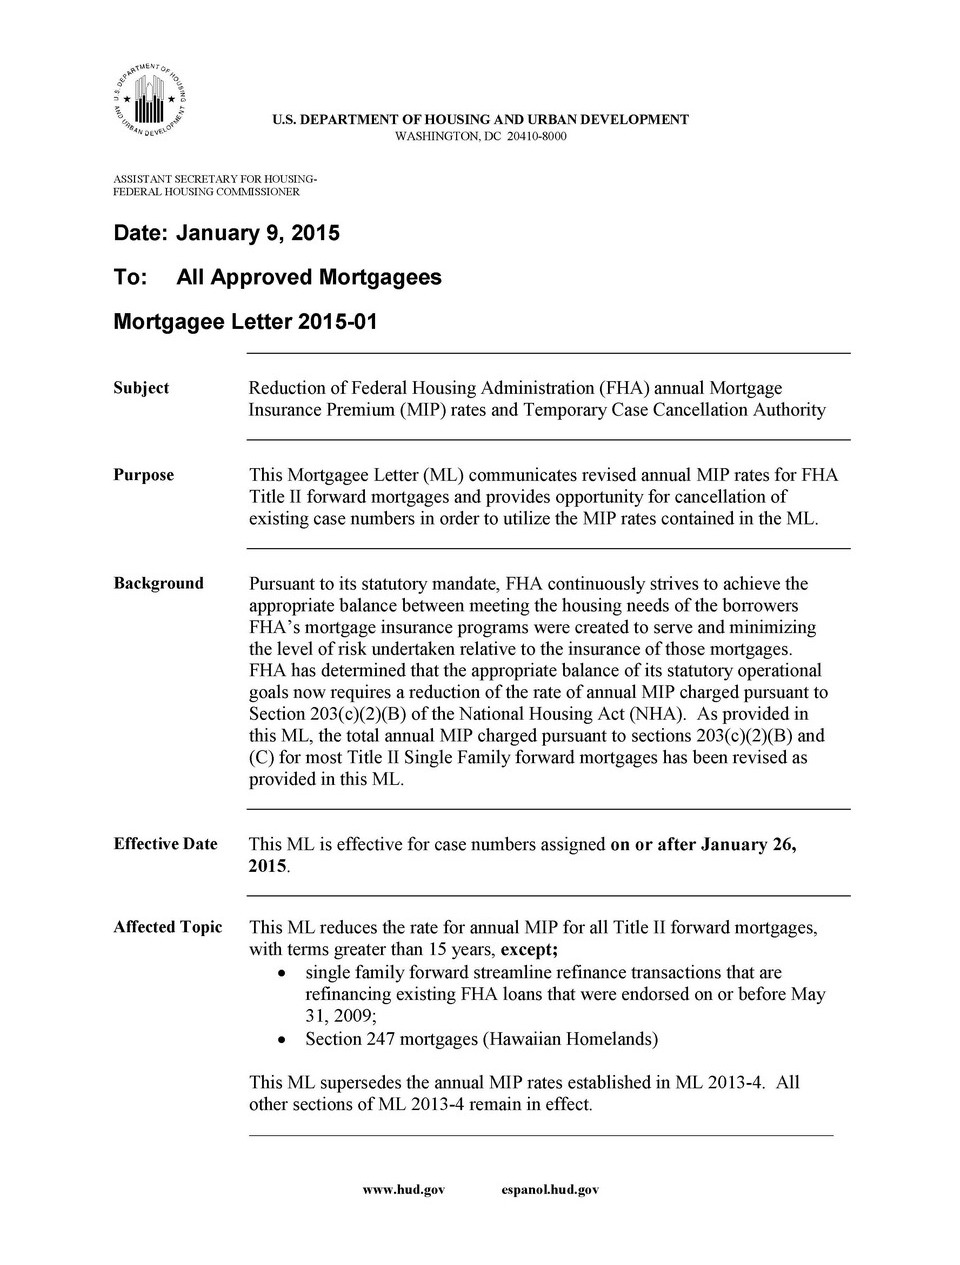 FHA Annual MIP Lowered 2015Jan_Page_1